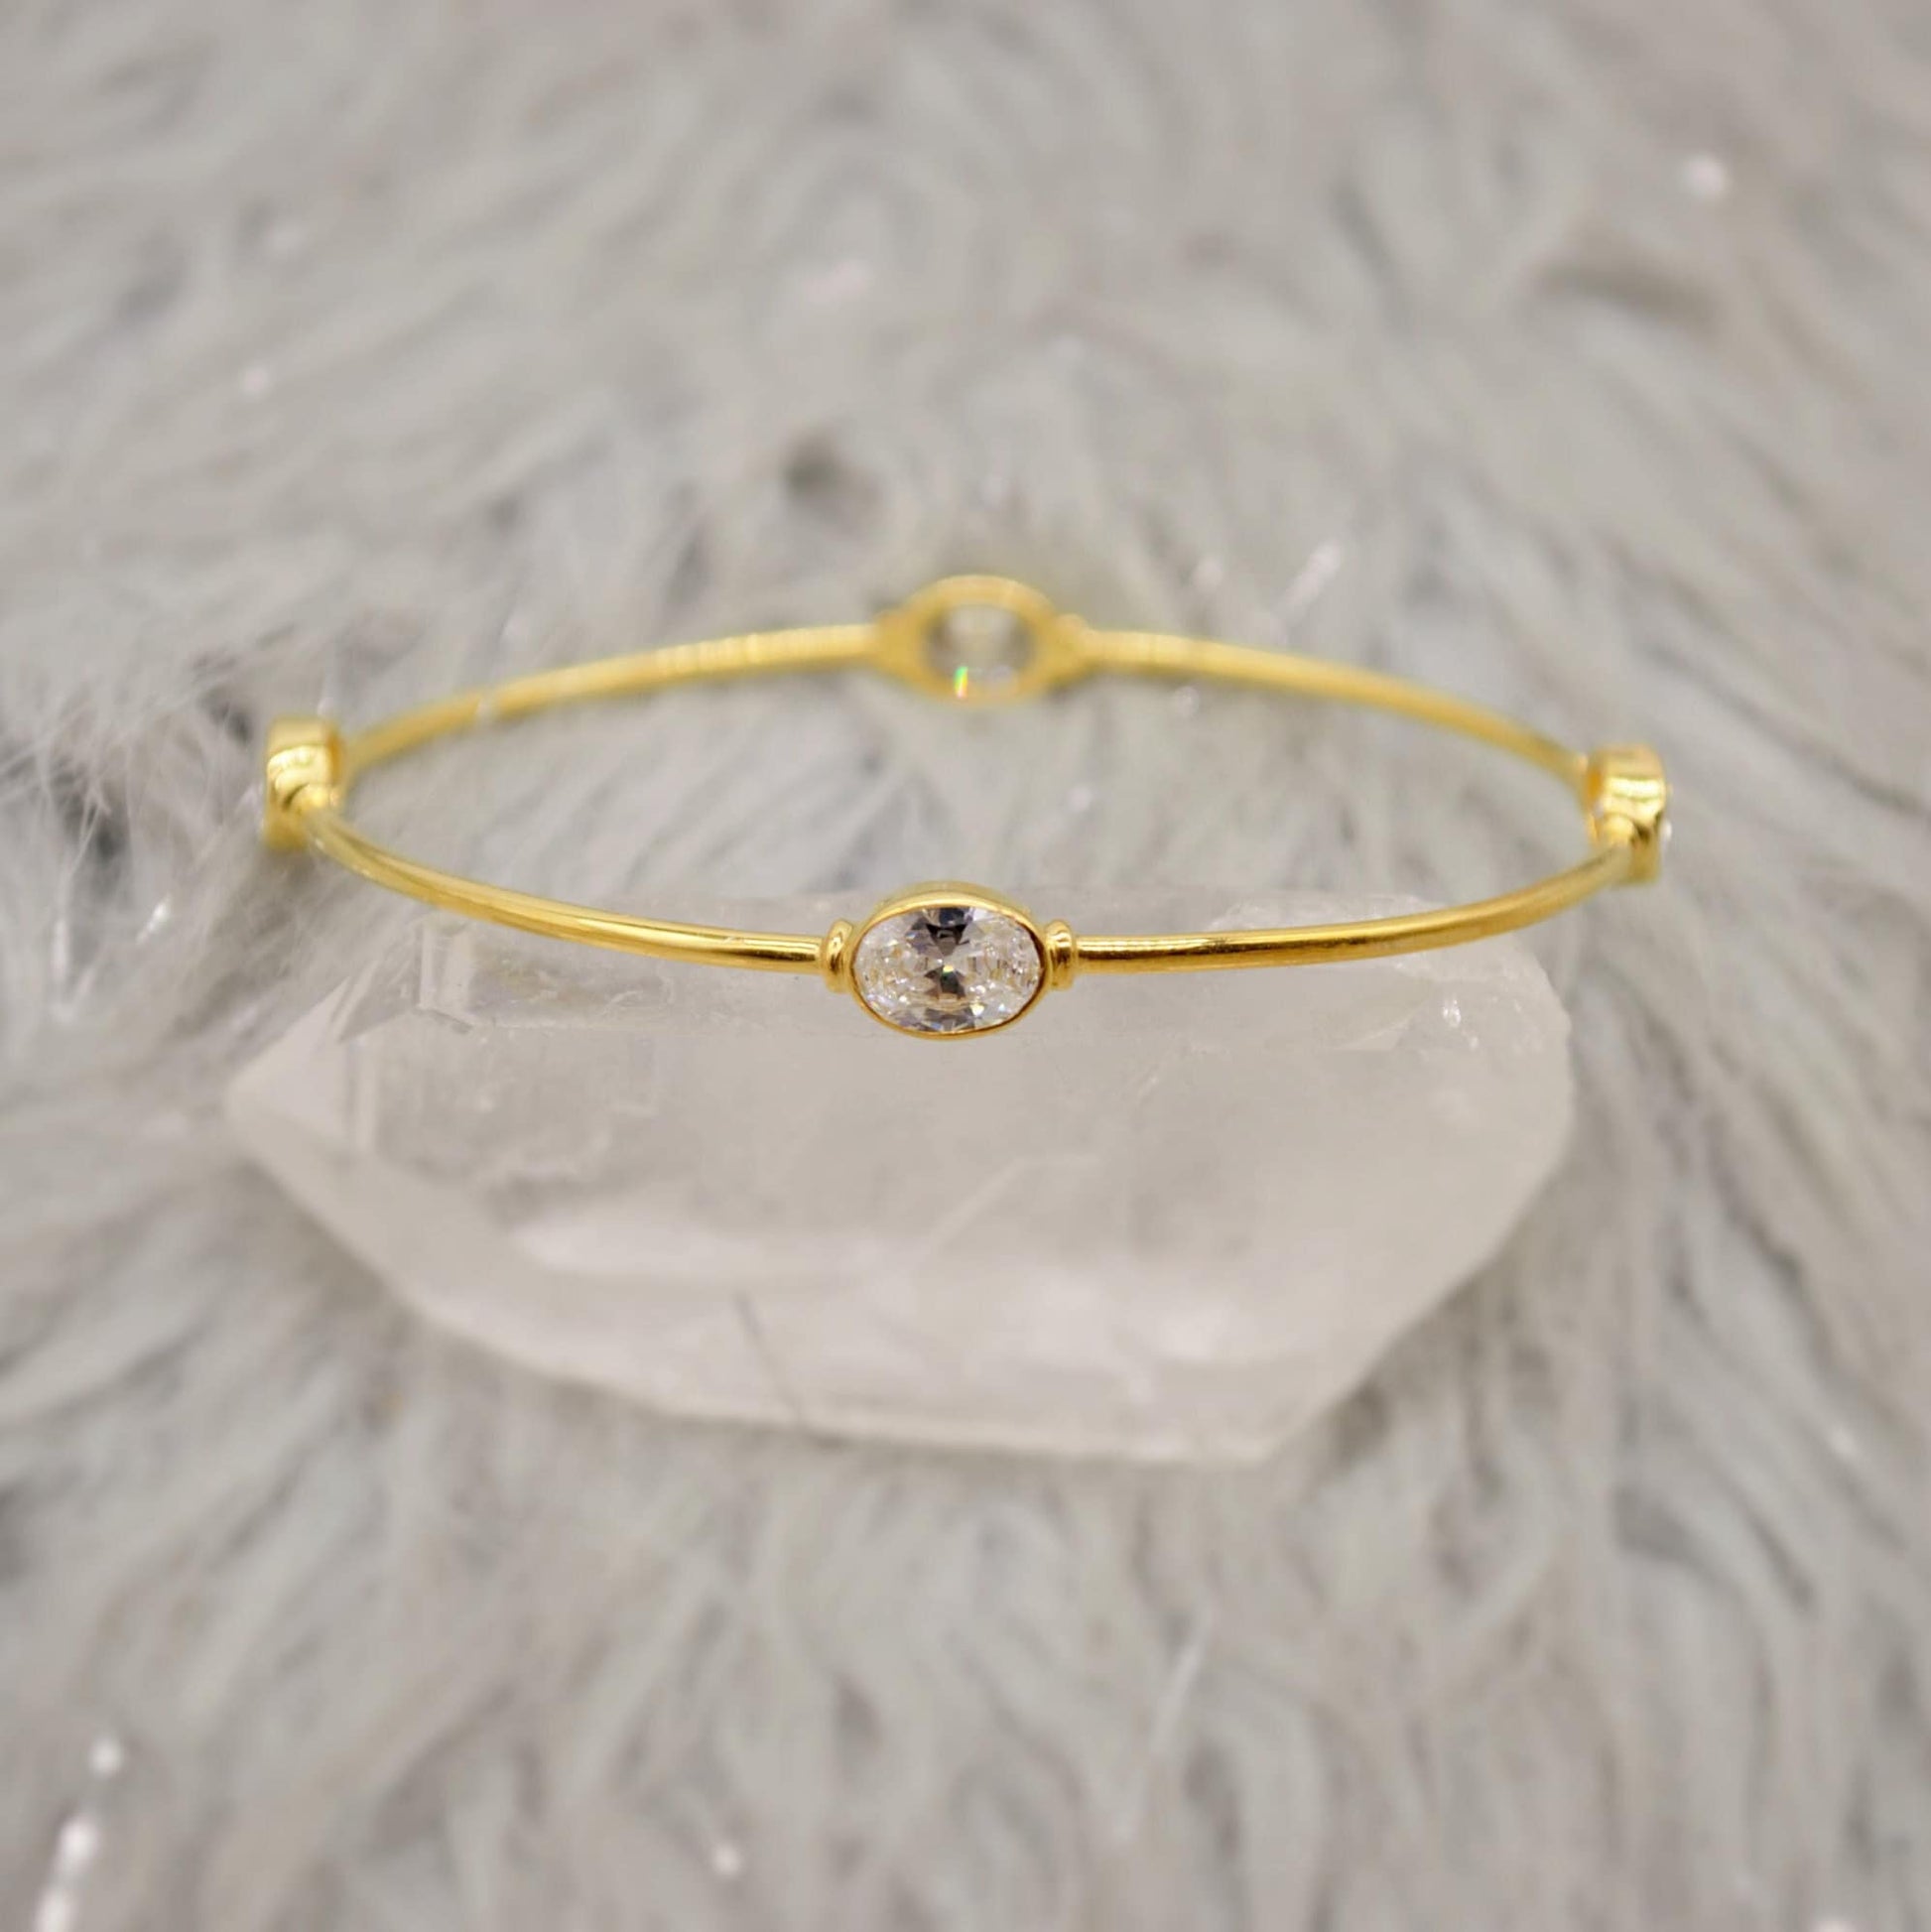 Cubic Zirconia Silver Bracelet, Gold Plated CZ Bangles For Women, Dainty Gemstone Bracelet, Birthday Gift For Her, Bridesmaid Gift